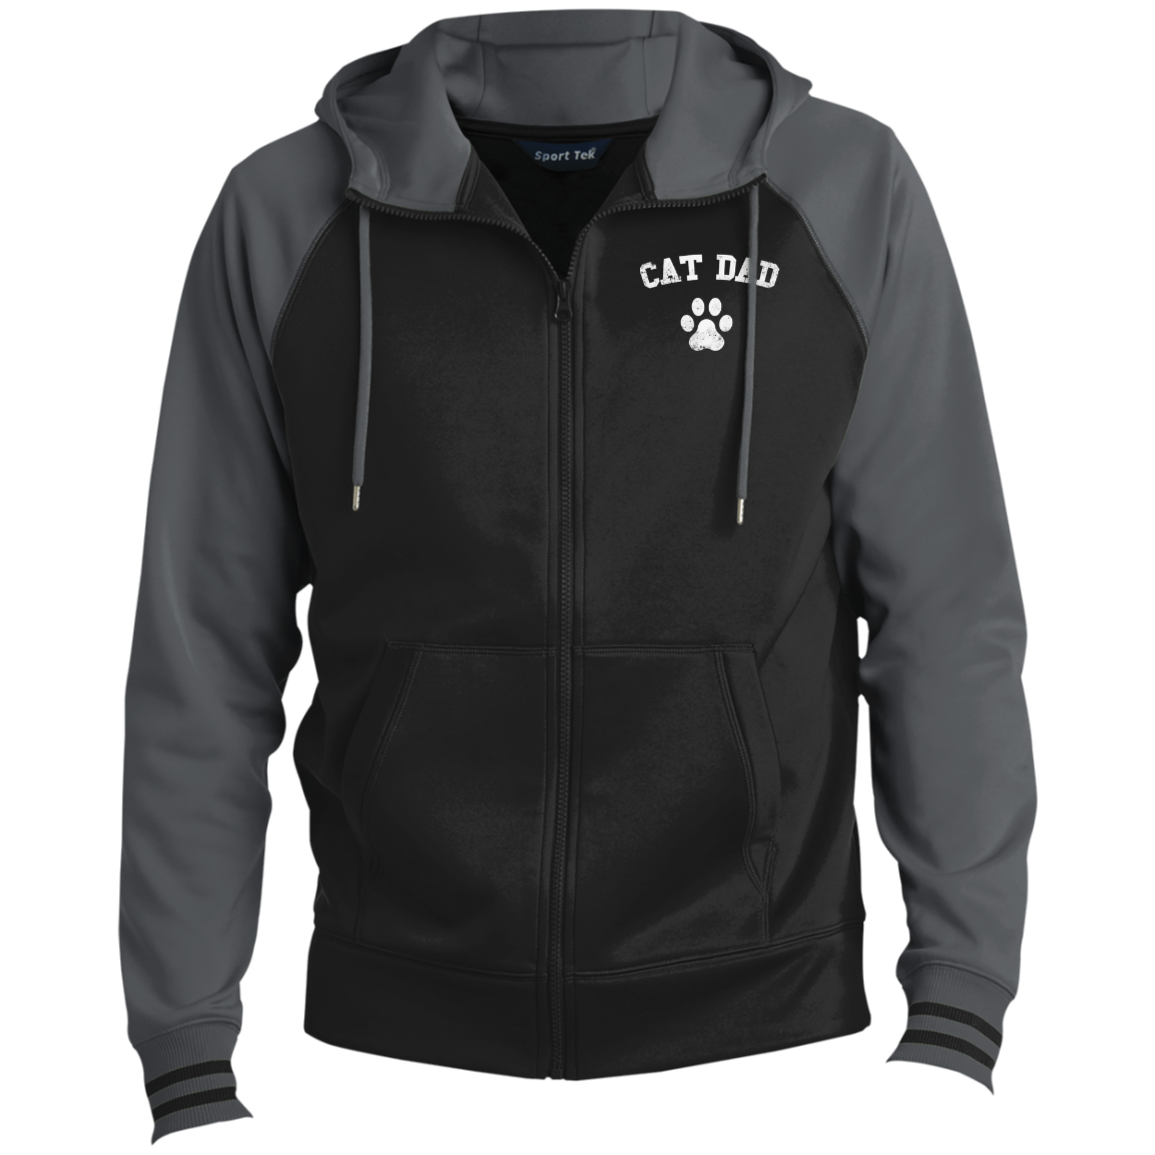 Daddy Gift For Cat Full-Zip Hooded